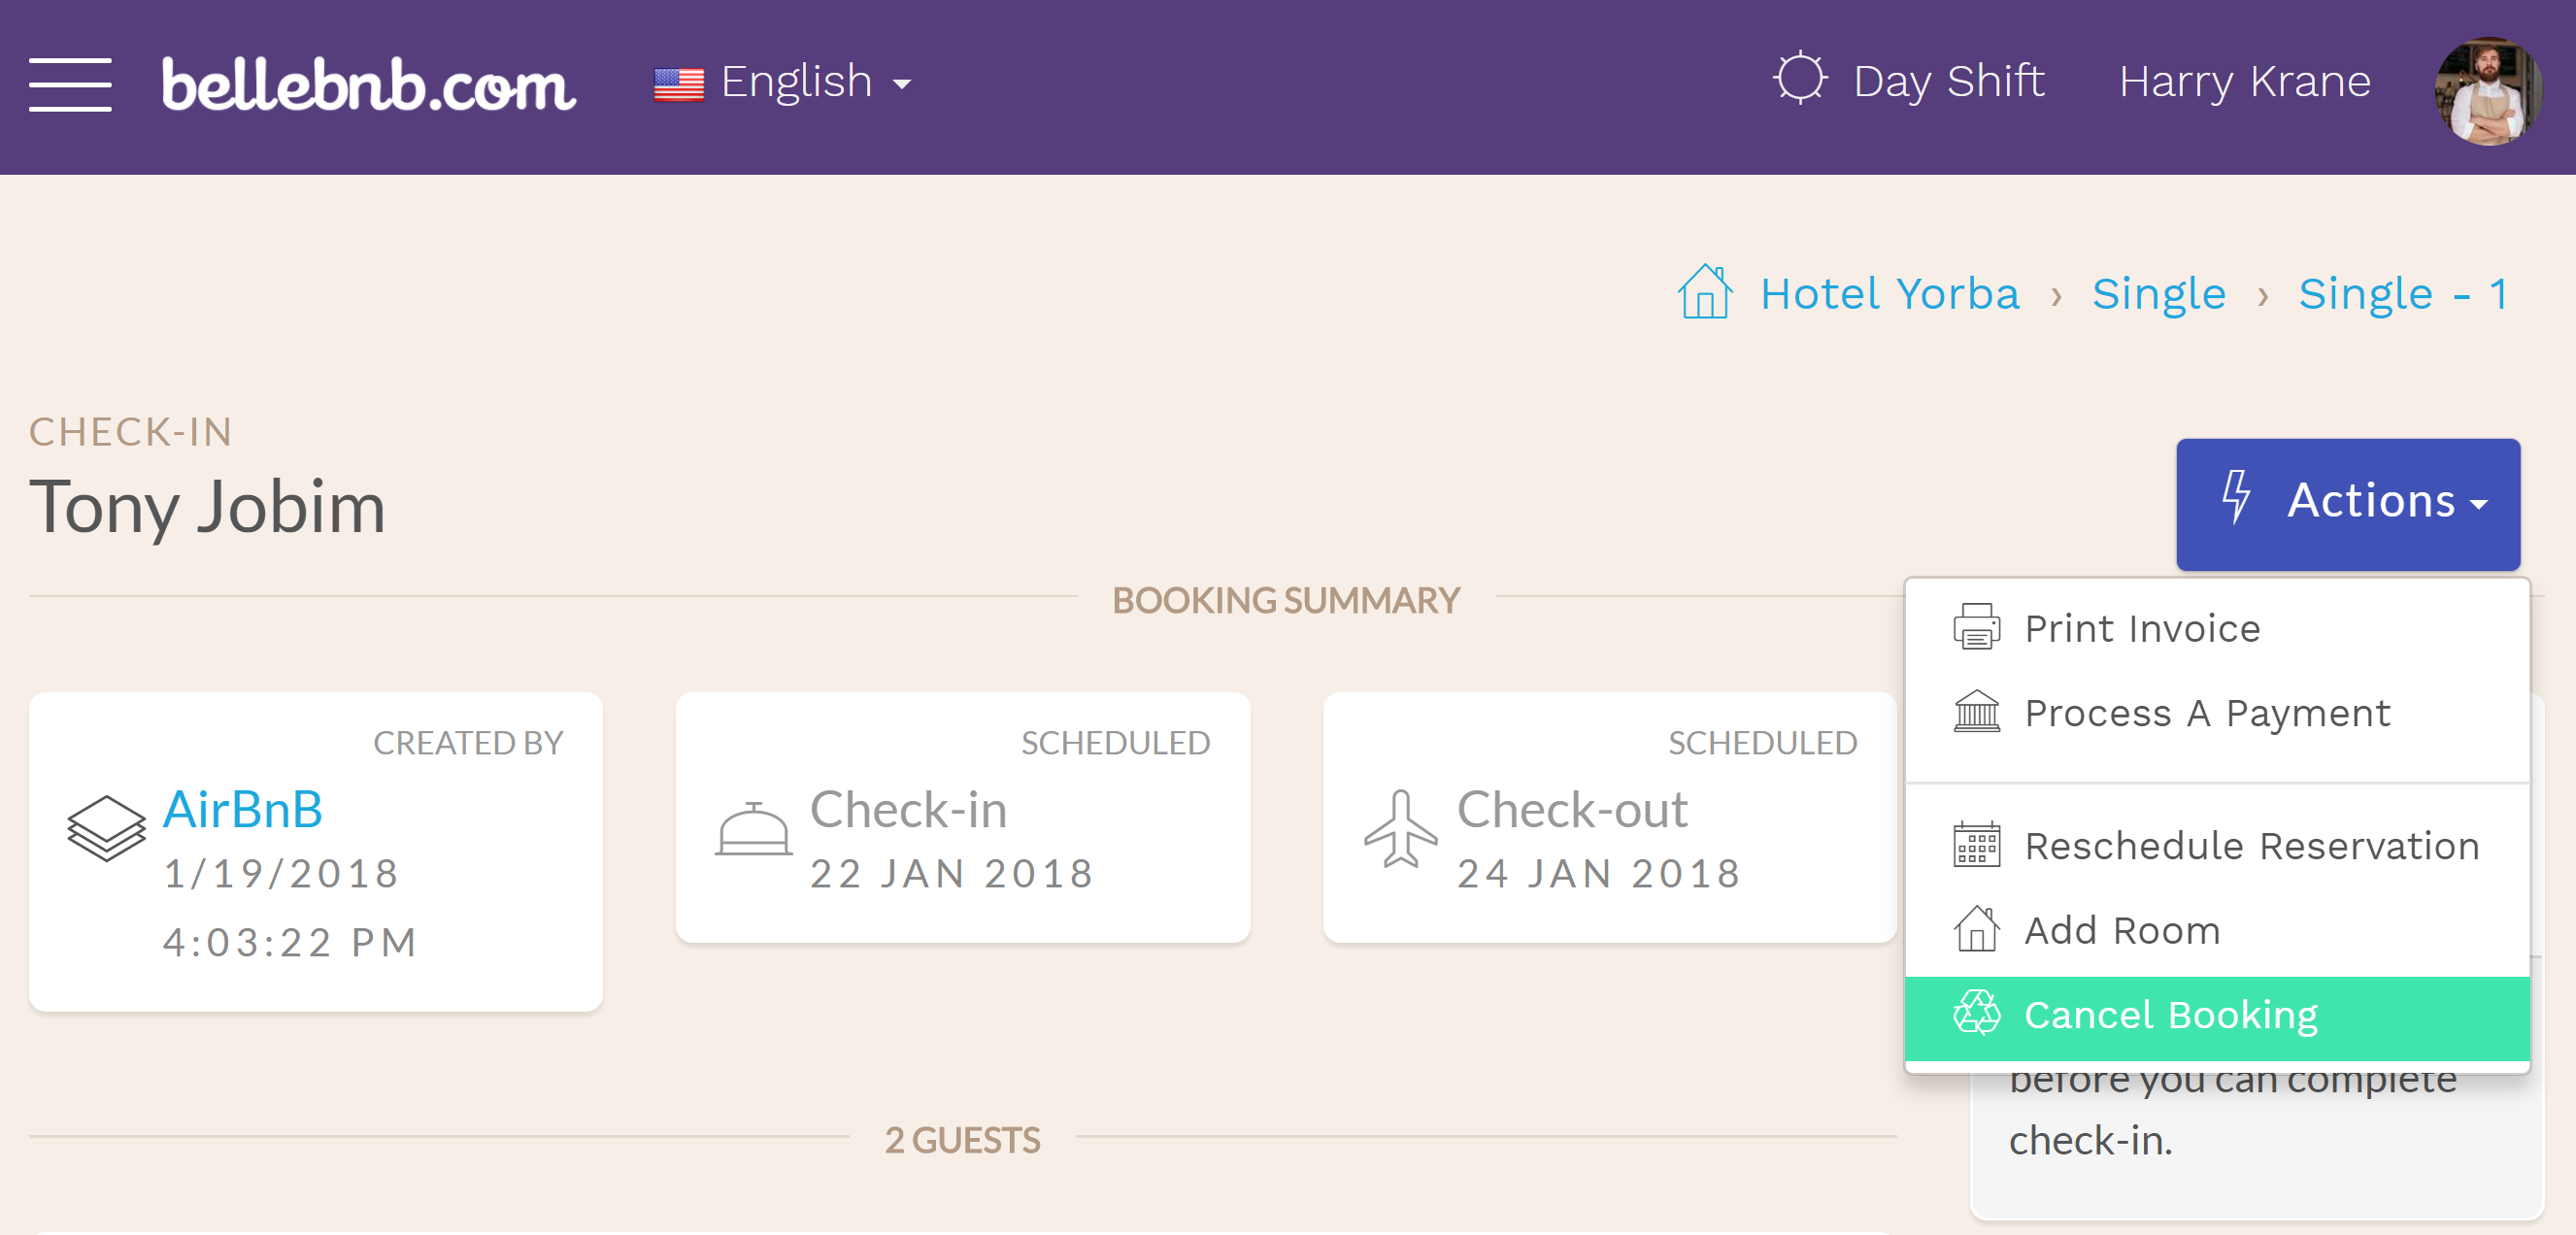 Hotel Cancel Booking Software In the case that the guest will not be checking in, if they have cancelled, you should click to view the reservation and cancel it. The notification will disappear on its own after you have cancelled the booking.